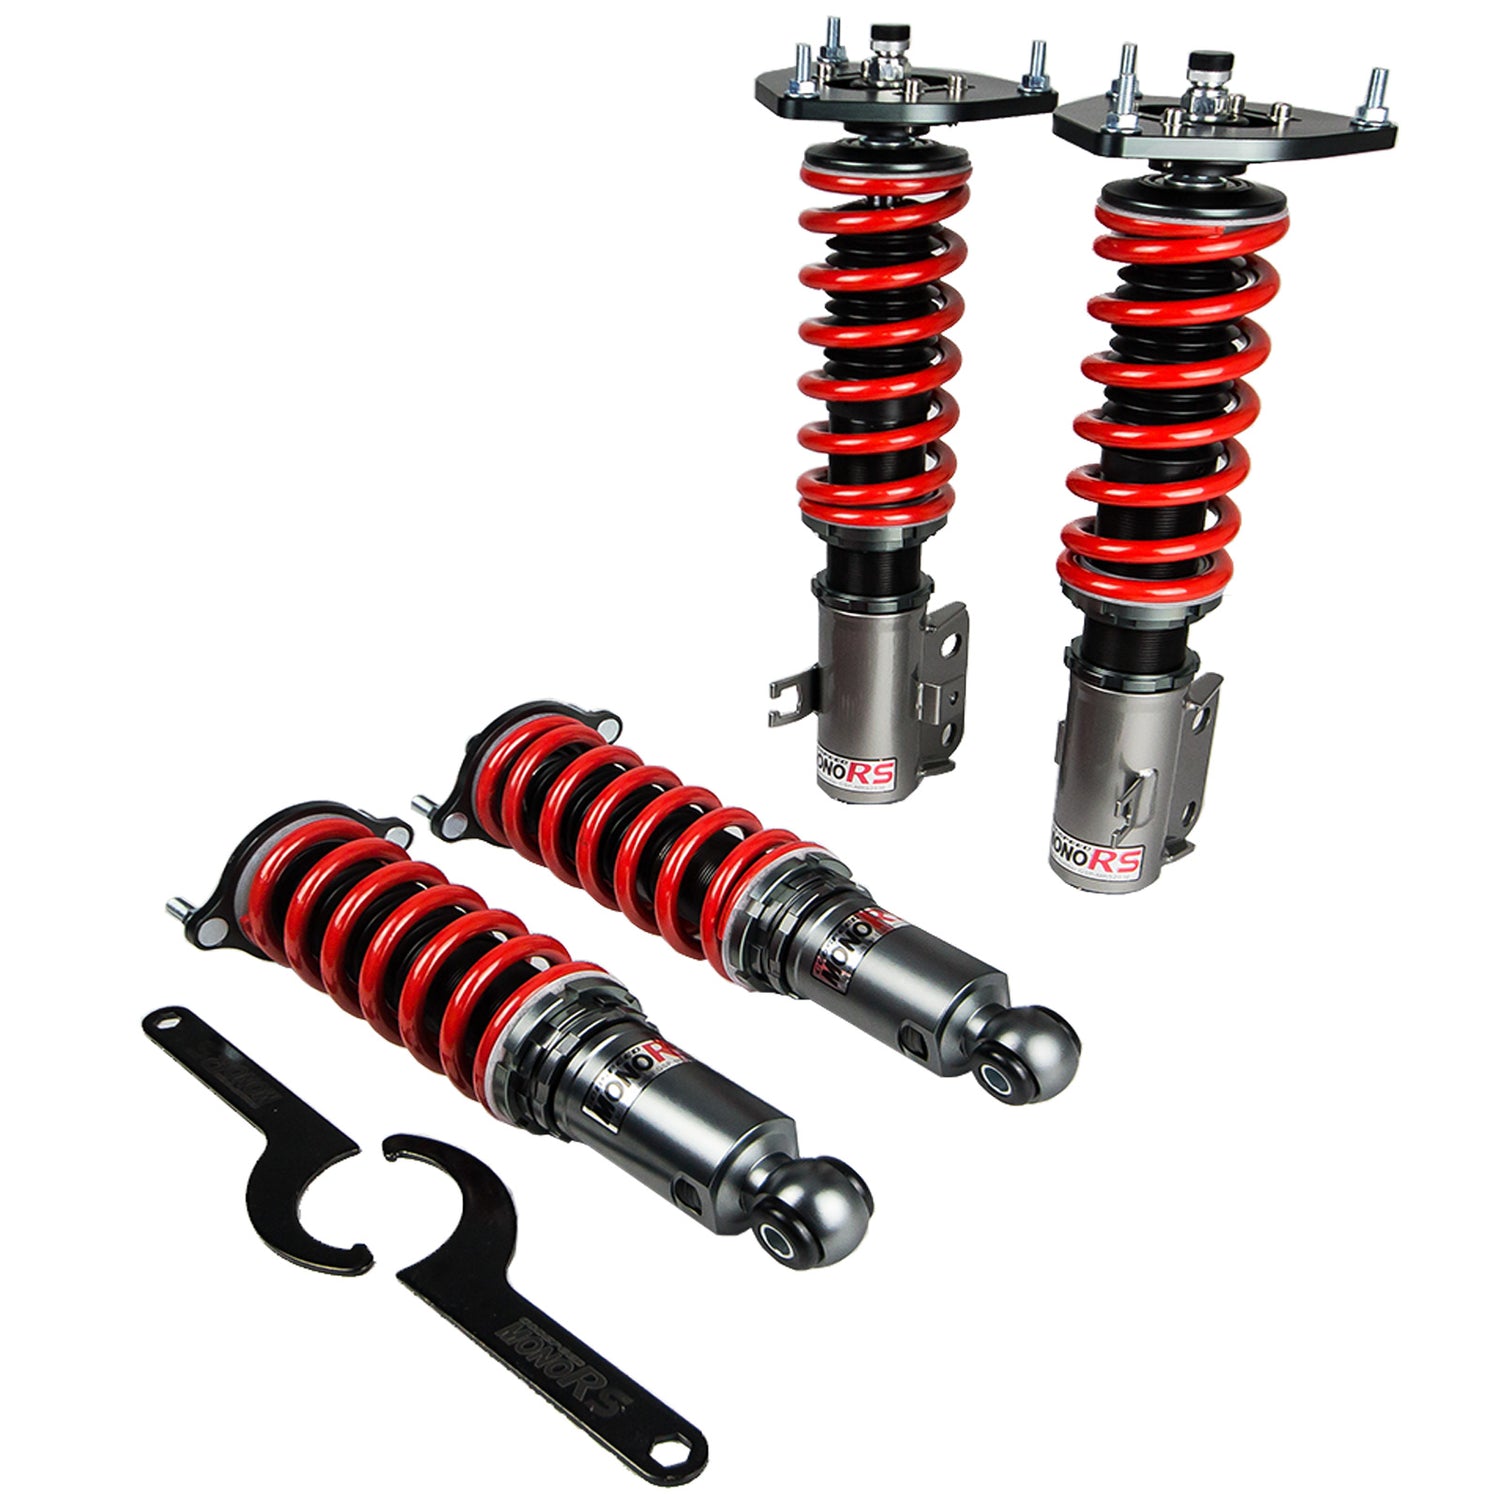 Godspeed(MRS2030) MonoRS Coilovers, Subaru Legacy 2000-04(BE), Fully Adjustable, Set of 4